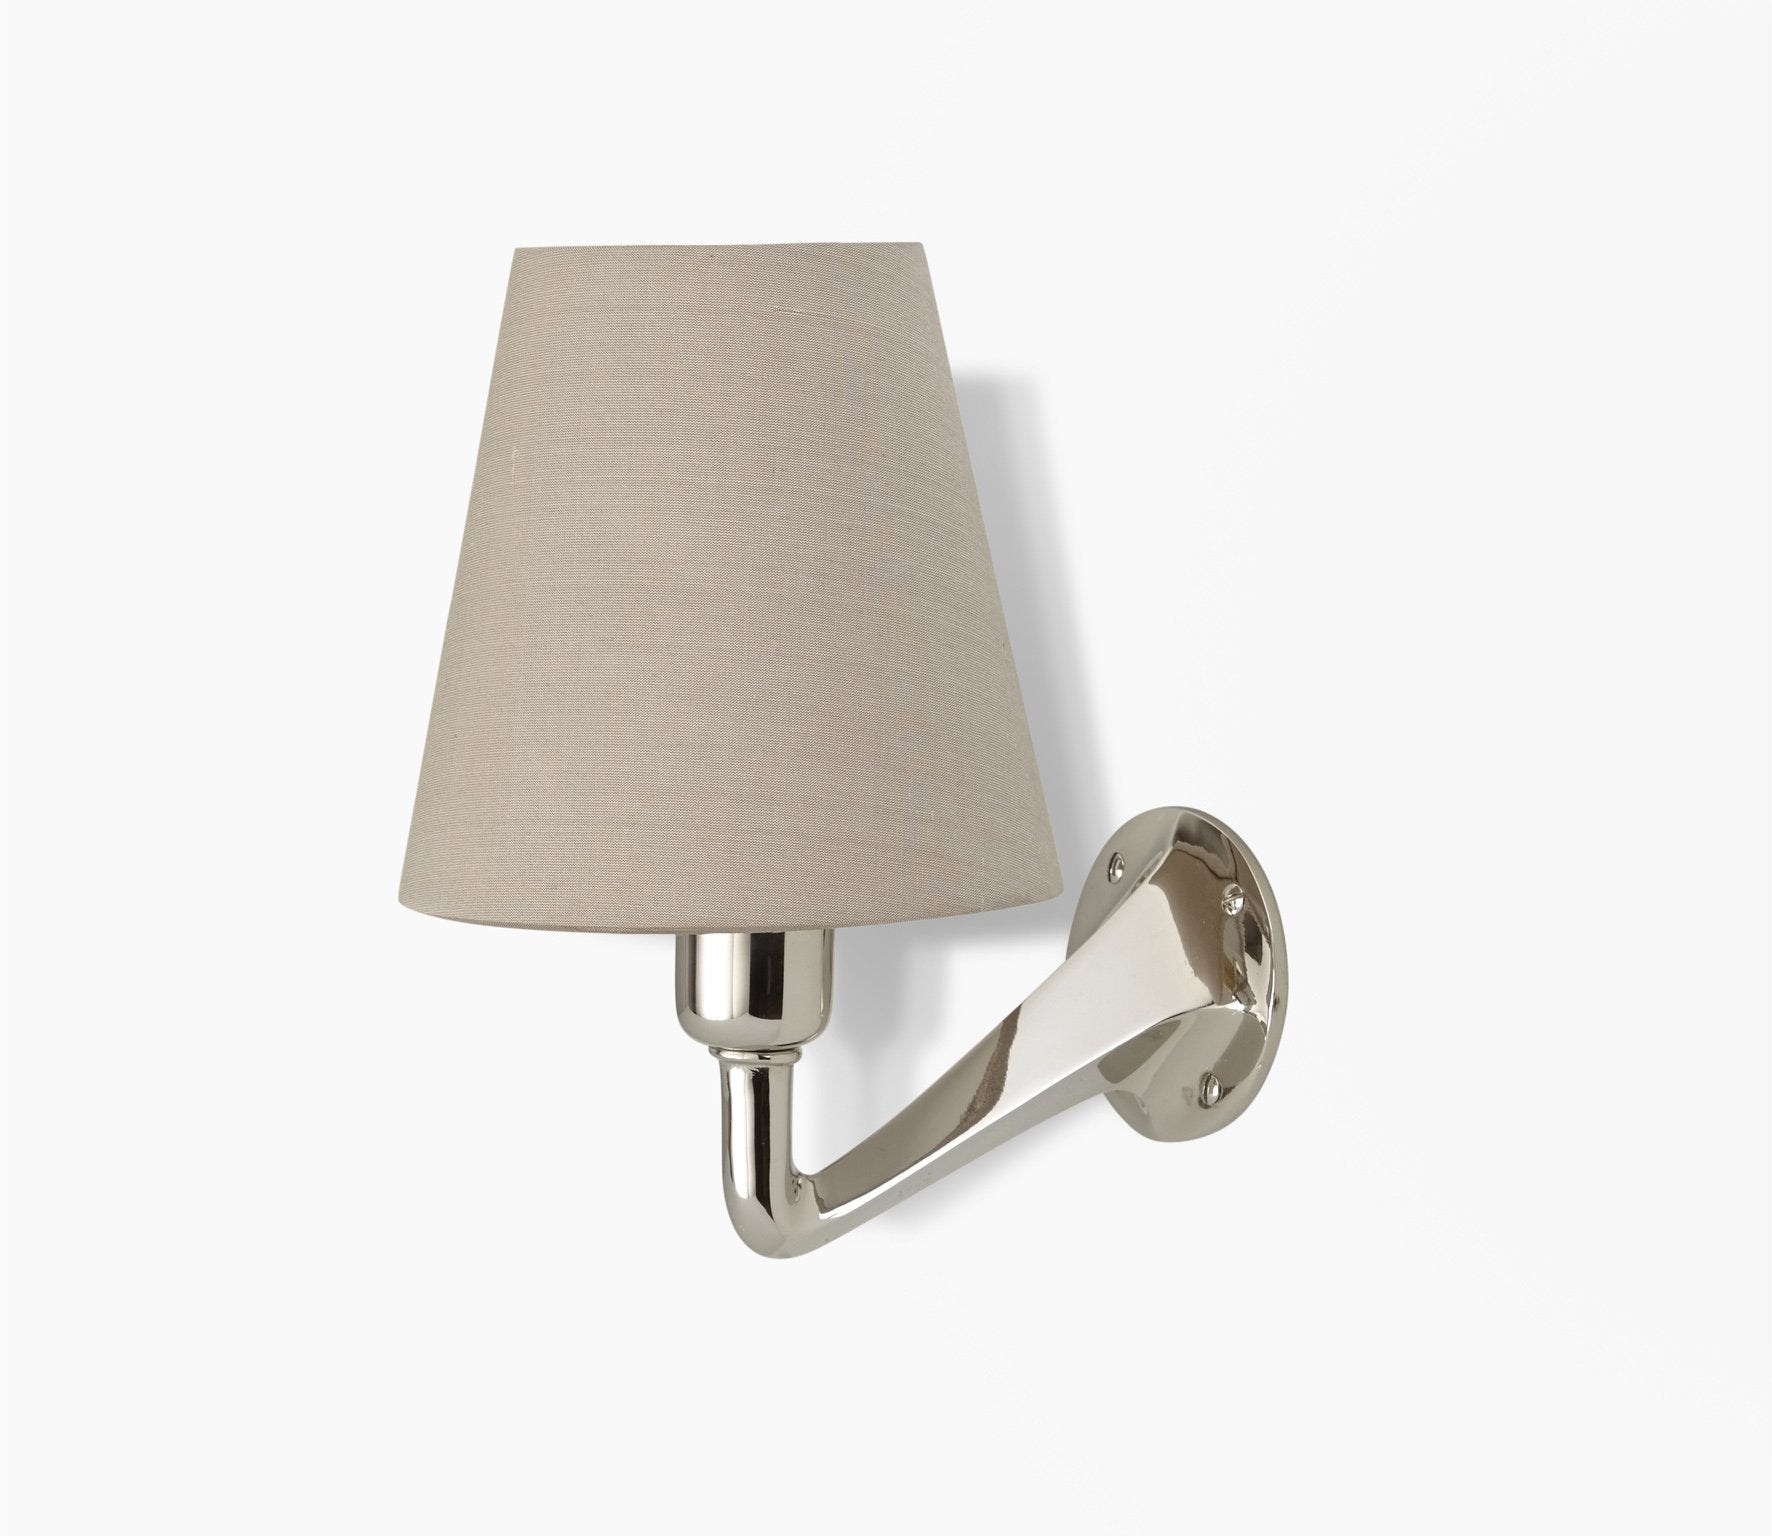 Leila Wall Light with Plain Empire Shade Product Image 7